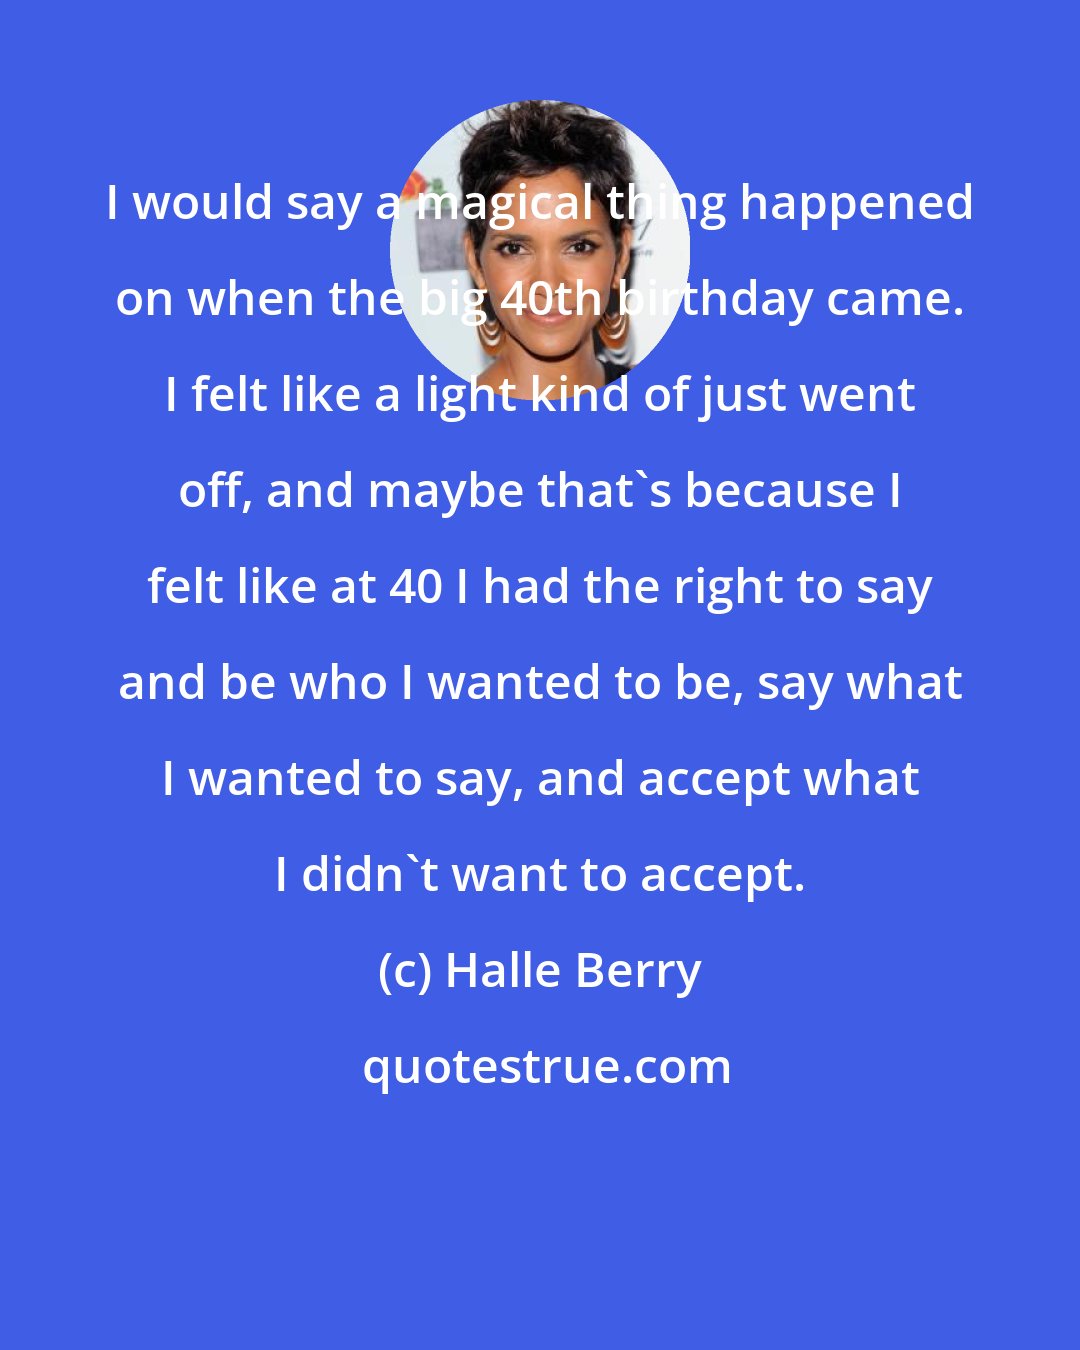 Halle Berry: I would say a magical thing happened on when the big 40th birthday came. I felt like a light kind of just went off, and maybe that's because I felt like at 40 I had the right to say and be who I wanted to be, say what I wanted to say, and accept what I didn't want to accept.